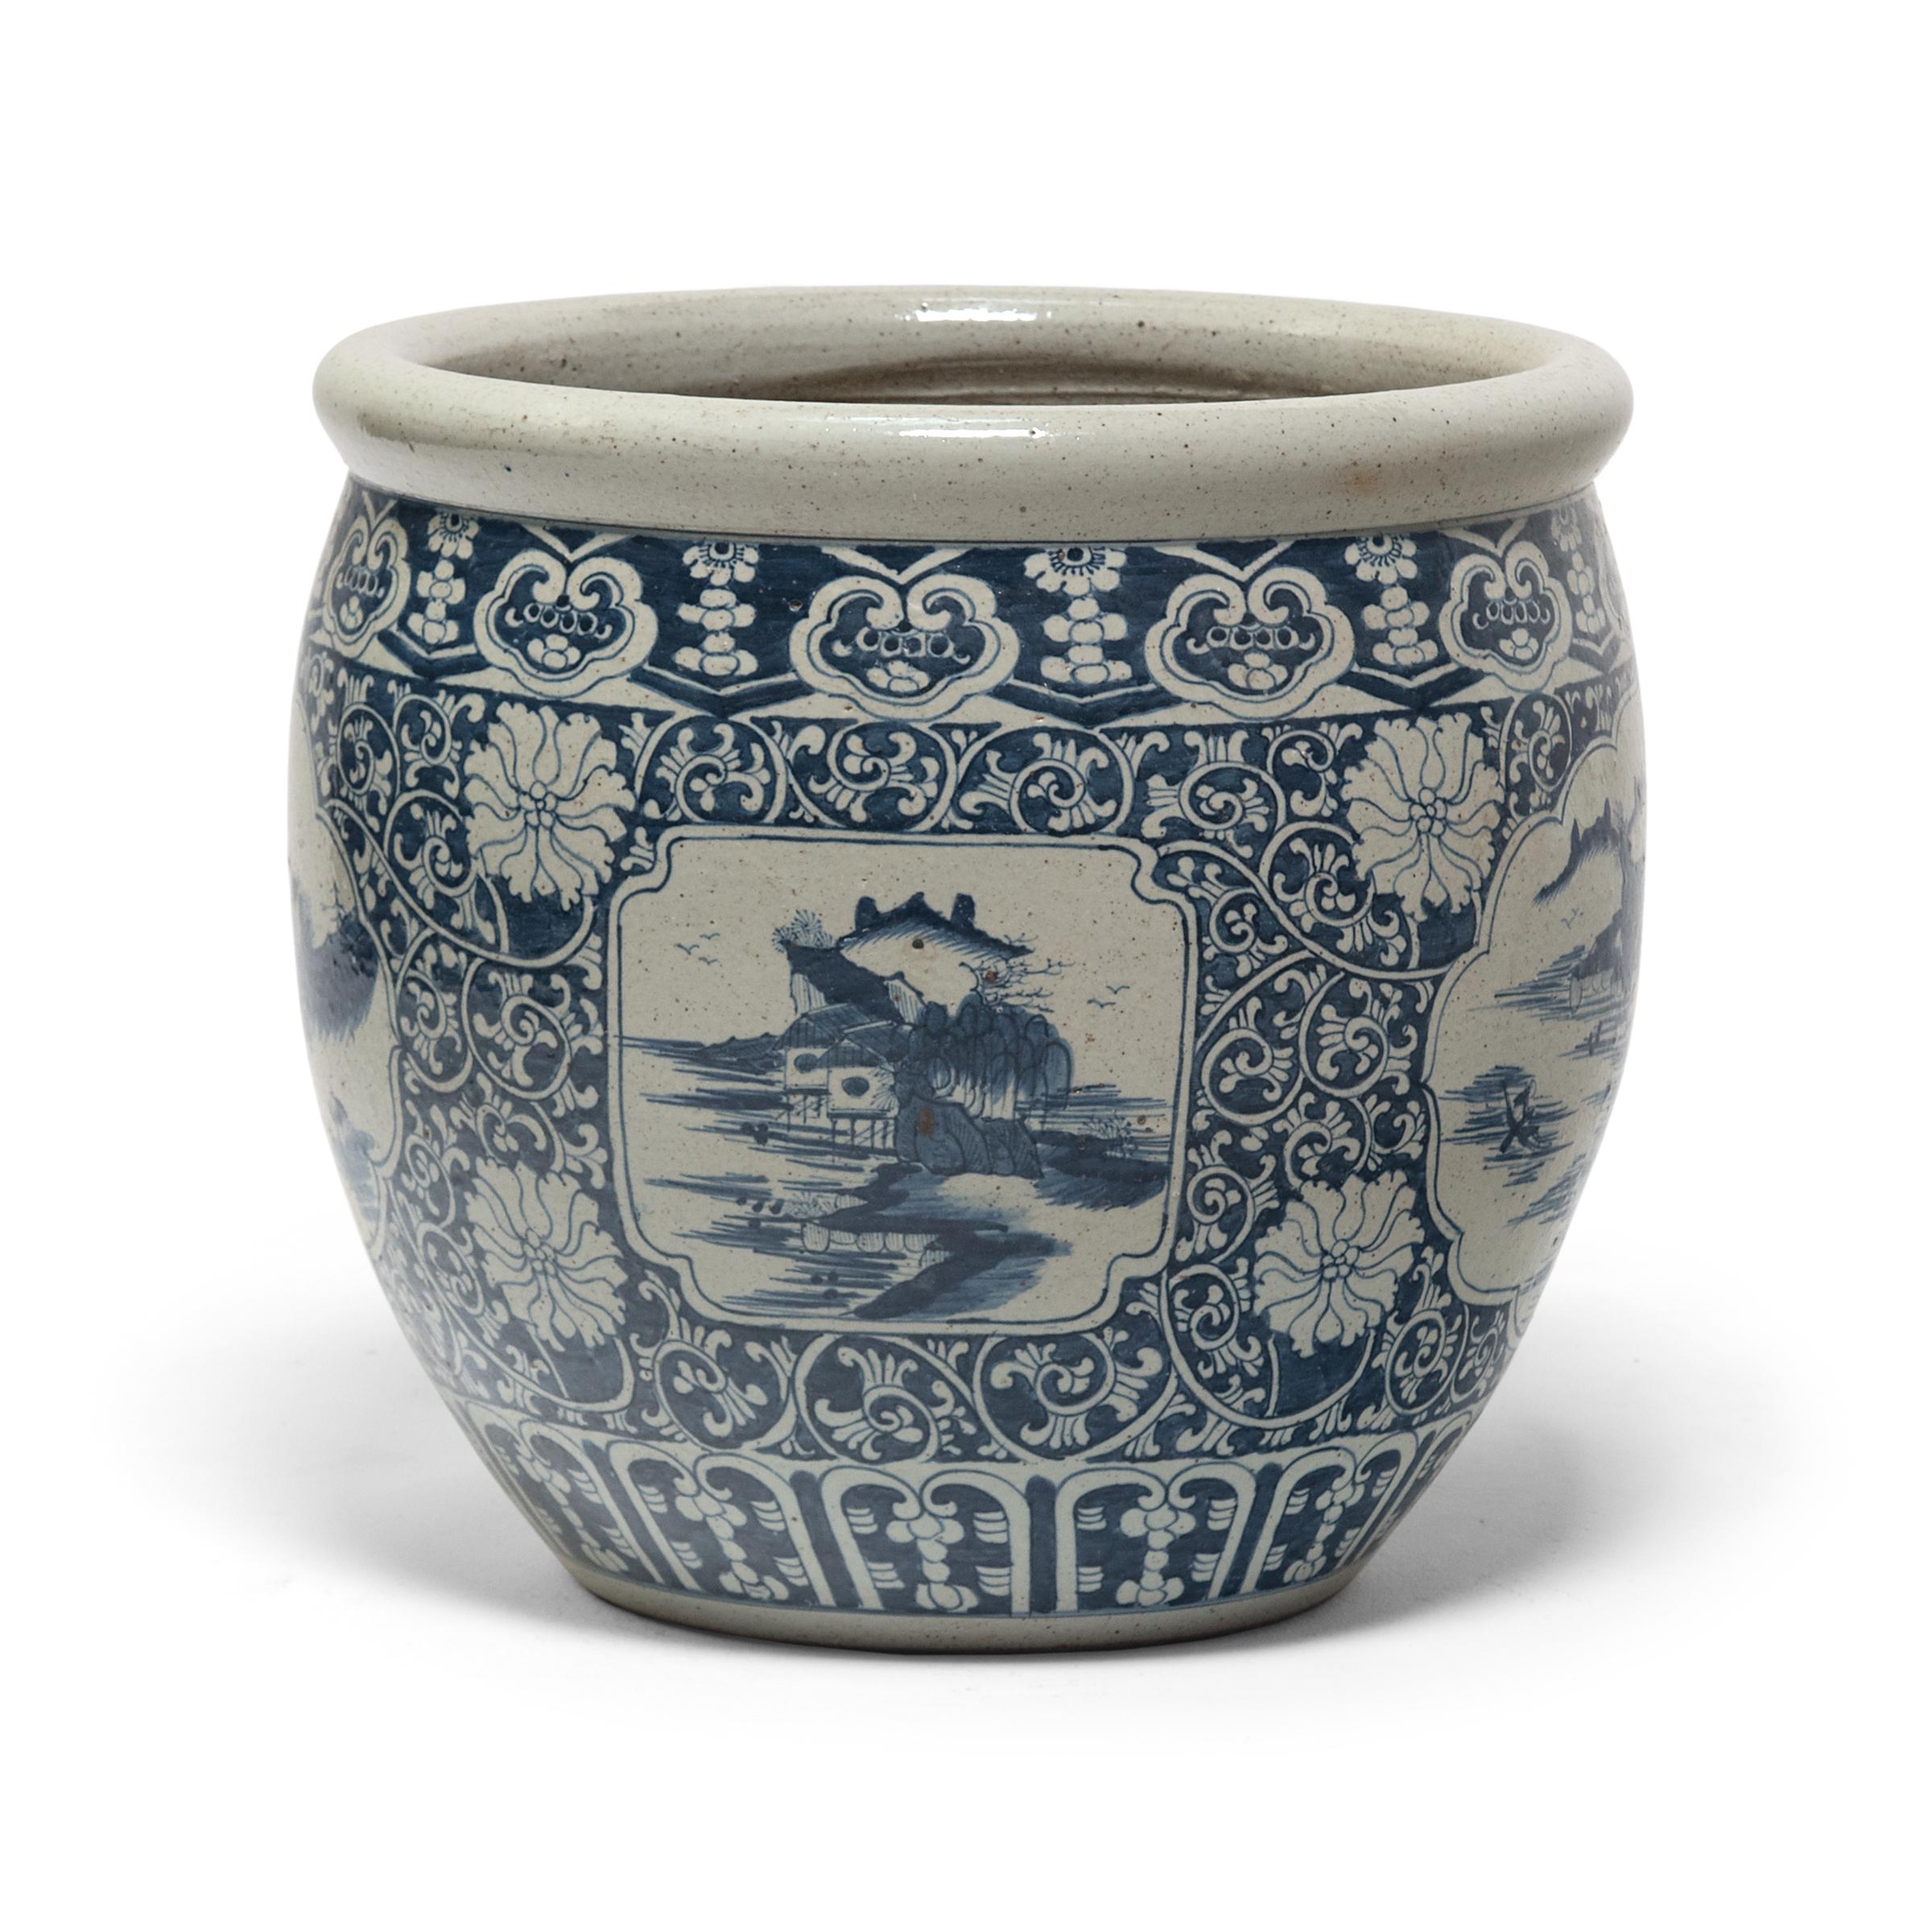 Introduced to Europe in the 14th century, Chinese porcelains were regarded items of luxury—and today blue and whites are among the most sought after by connoisseurs. The paintings on this basin are consistent with the traditional shan shui design: a